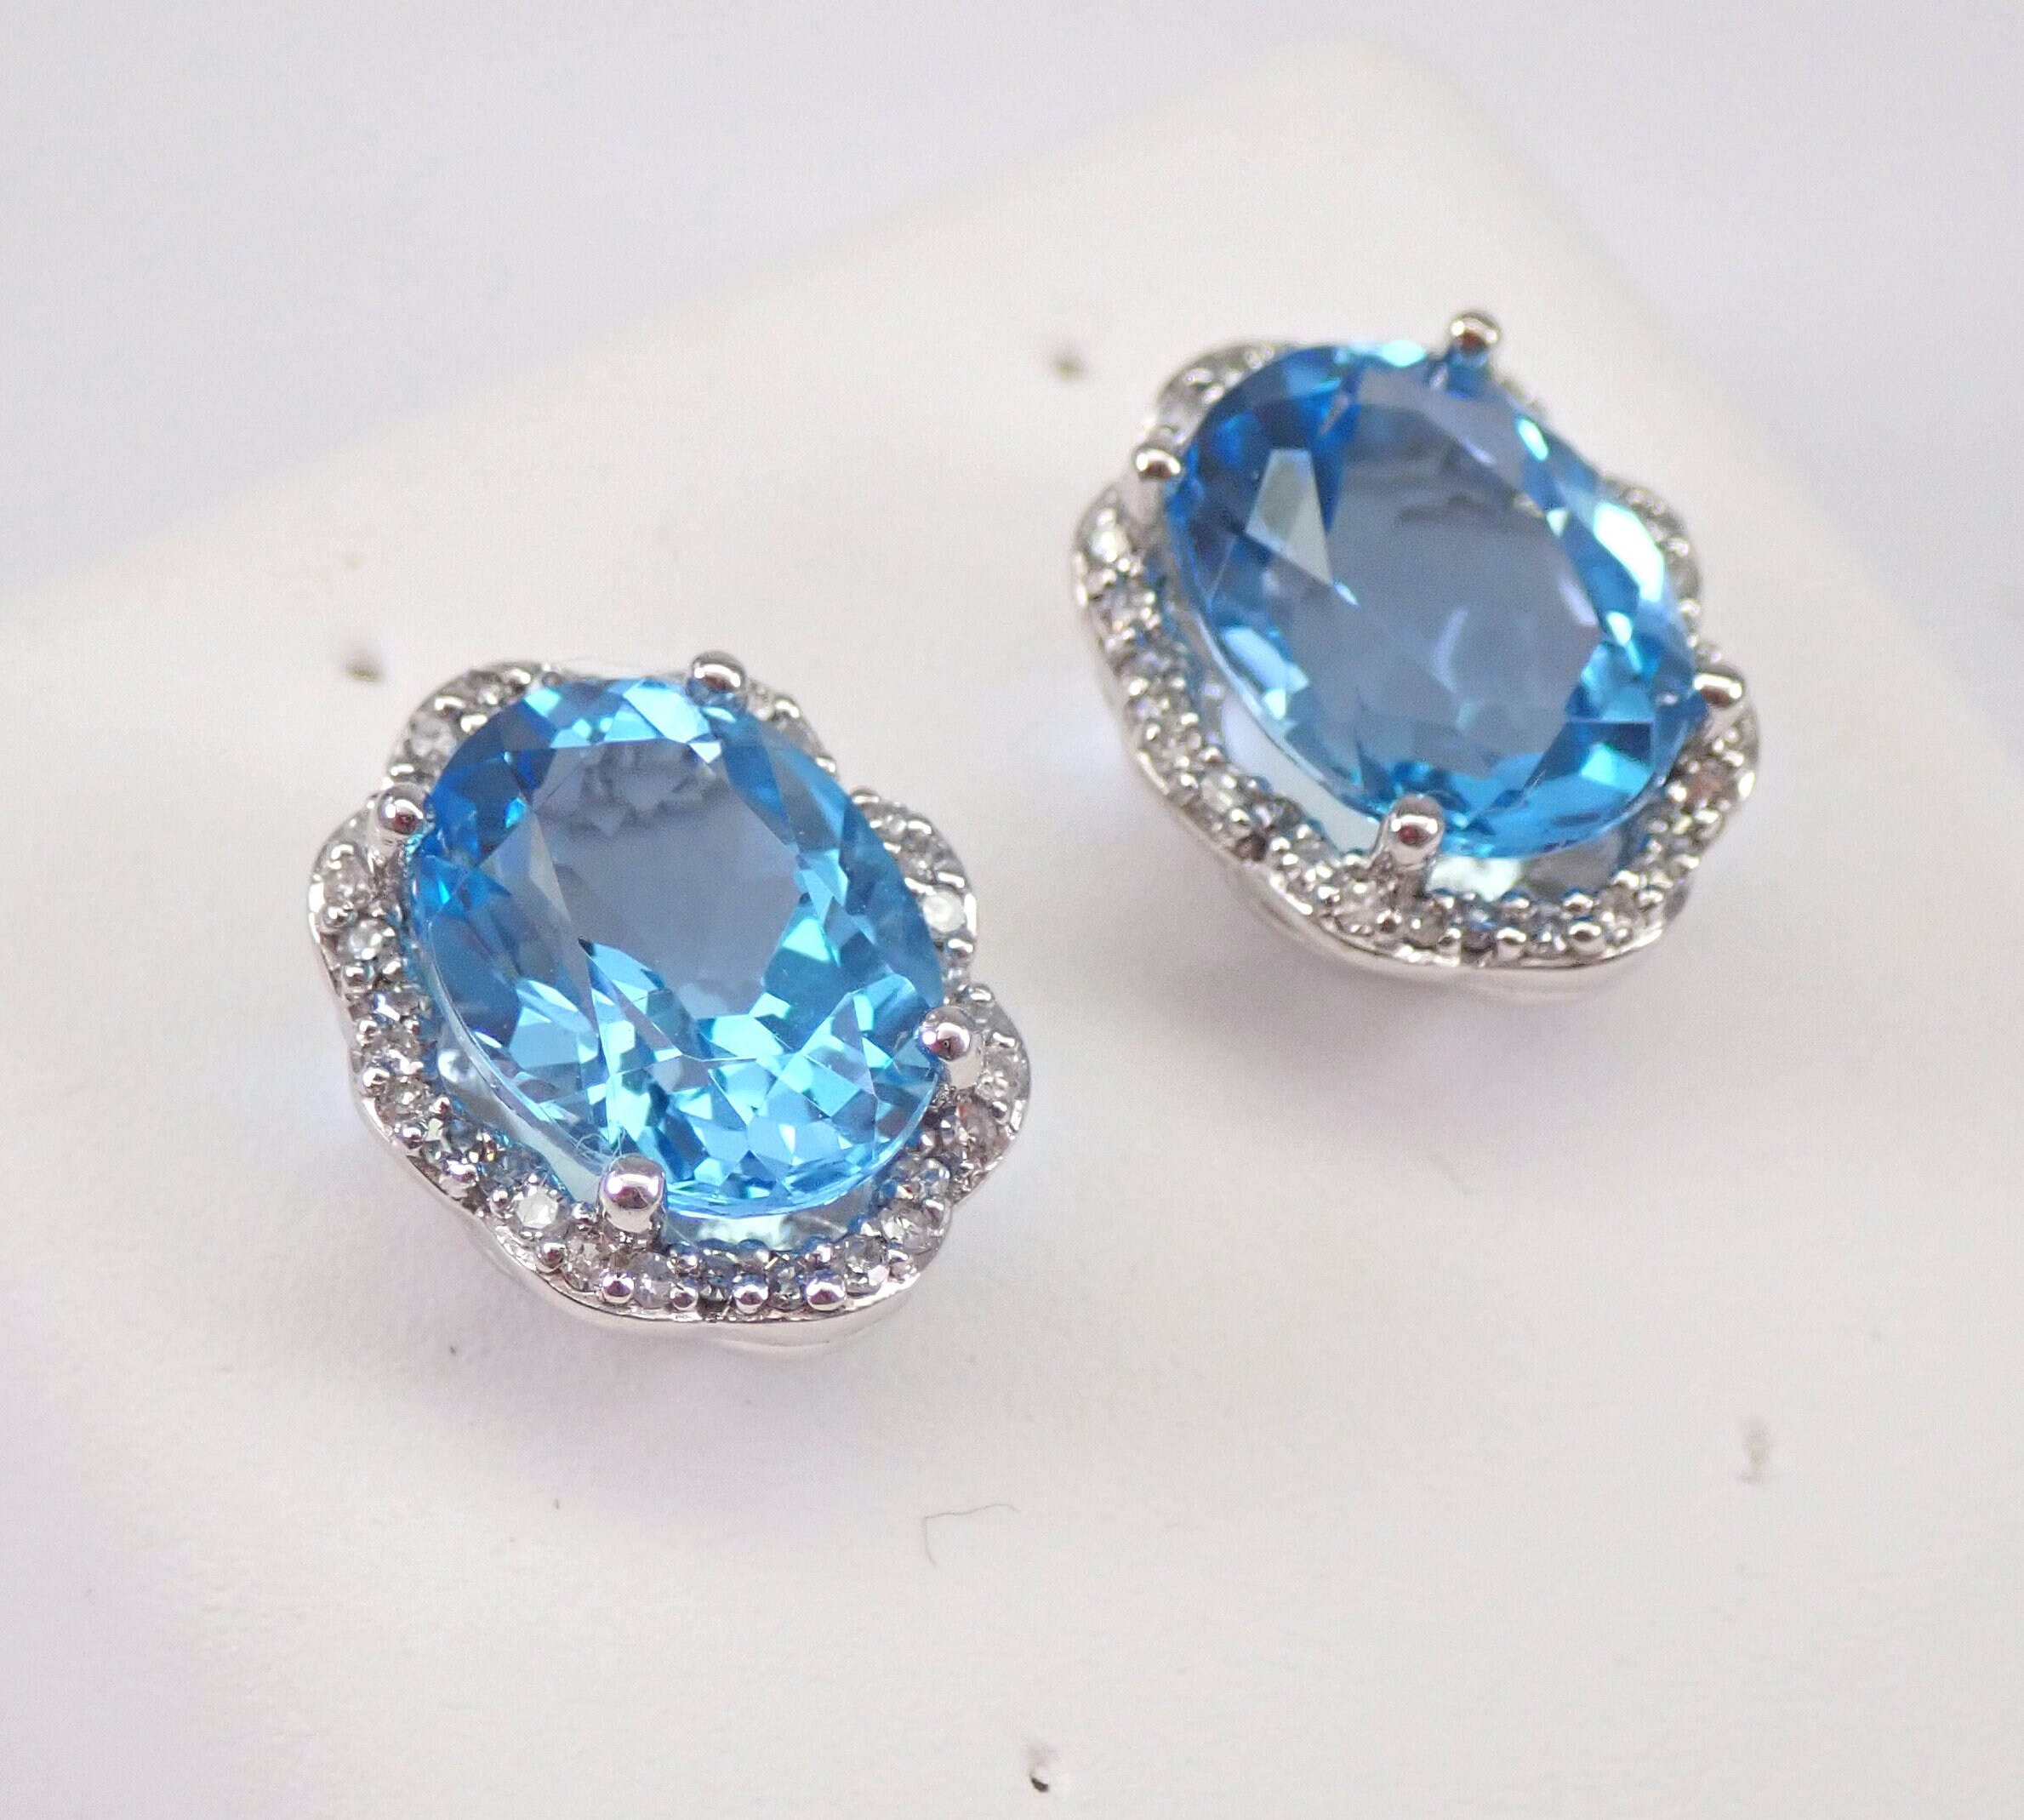 3.30 ct Blue Topaz and Diamond Stud Earrings Halo Studs White Gold ...